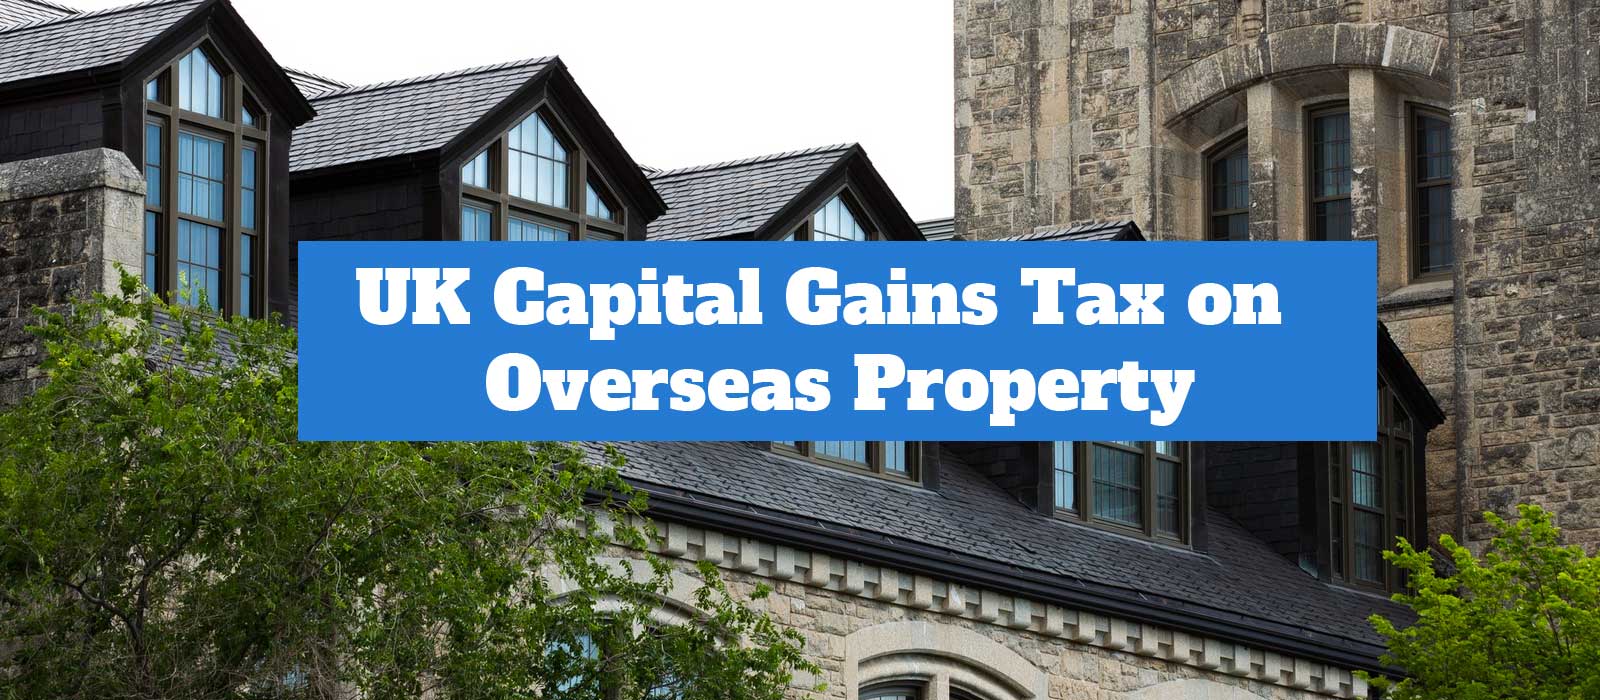 Selling Overseas Property? Look After UK Capital Gains Tax